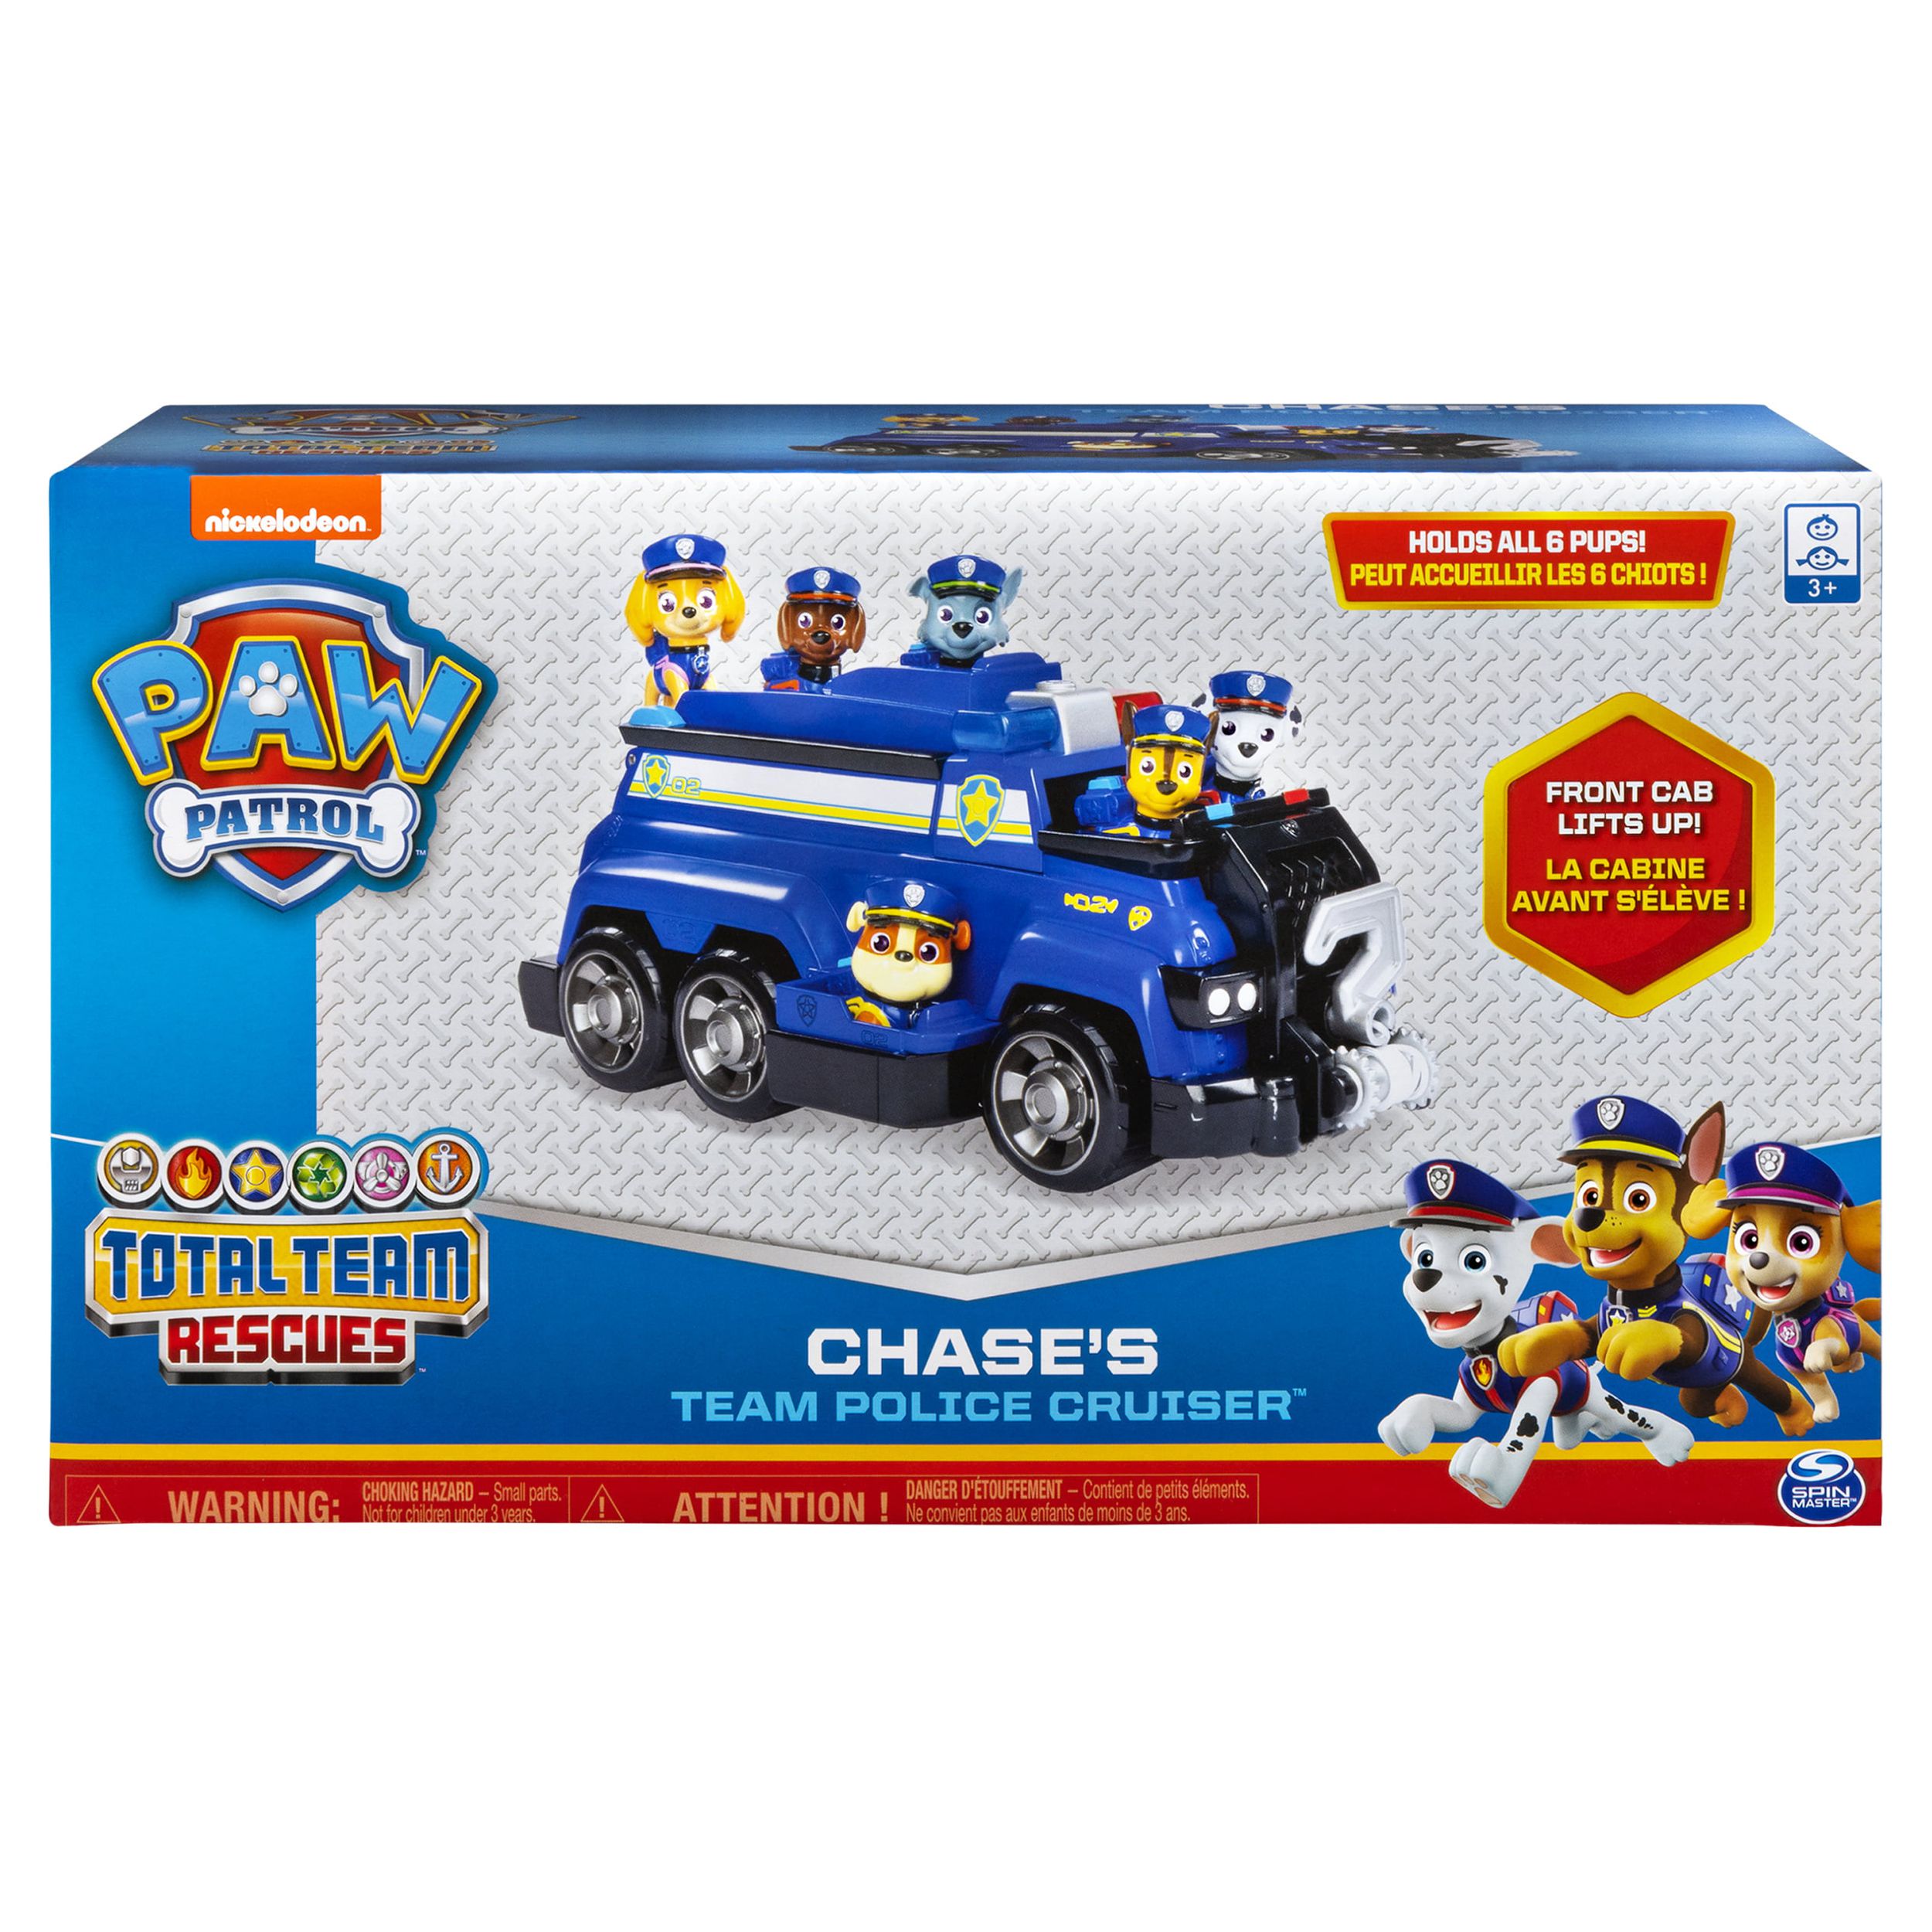 PAW Patrol, Chase’s Total Team Rescue Police Cruiser Vehicle with 6 Pups, for Kids Aged 3 and Up - image 2 of 3